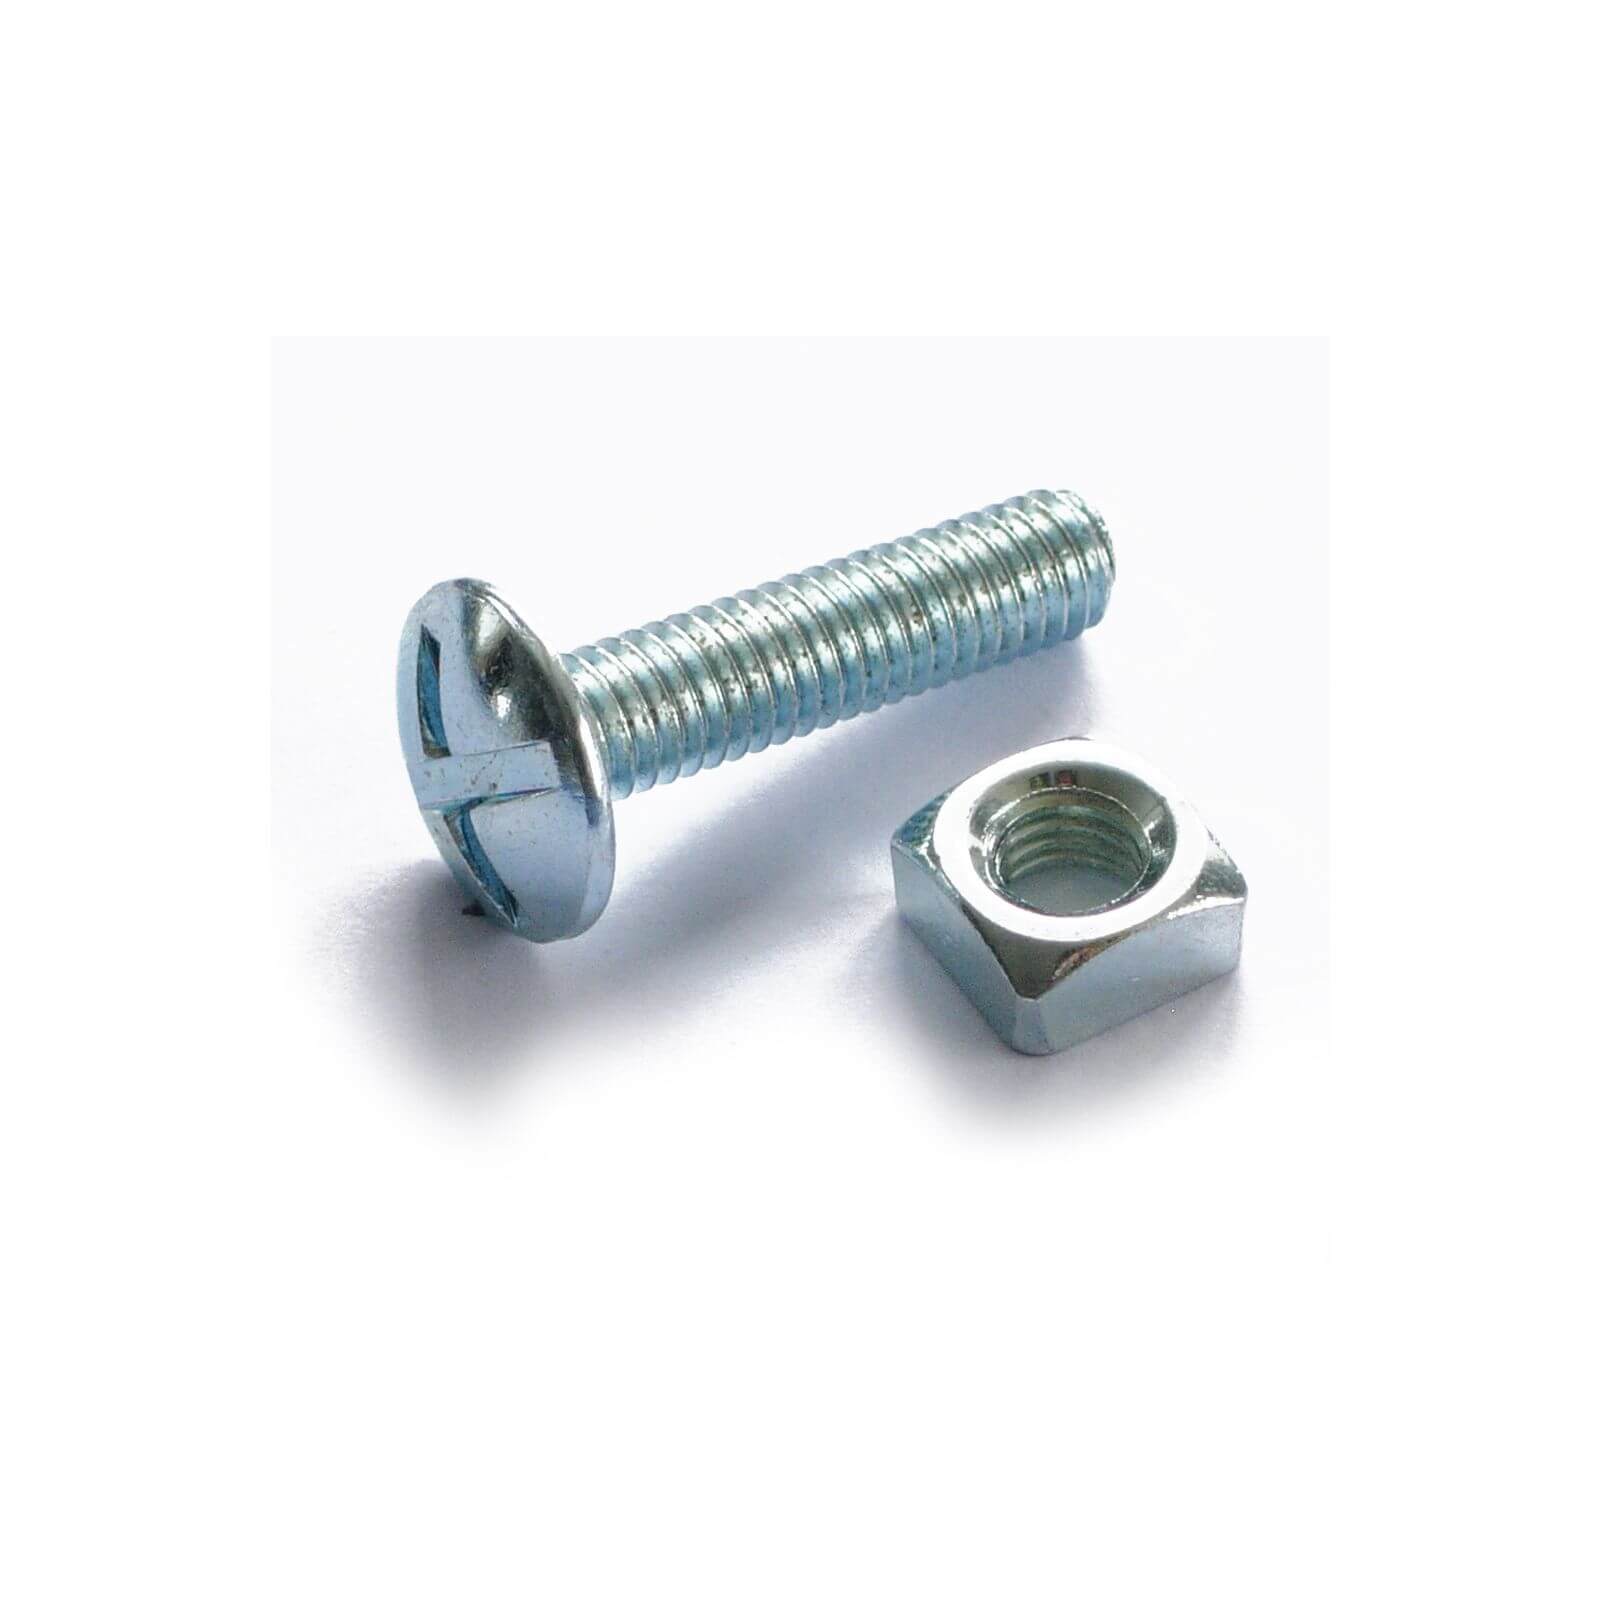 Roofing Bolt - Bright Zinc Plated - M8 50mm - 10 Pack